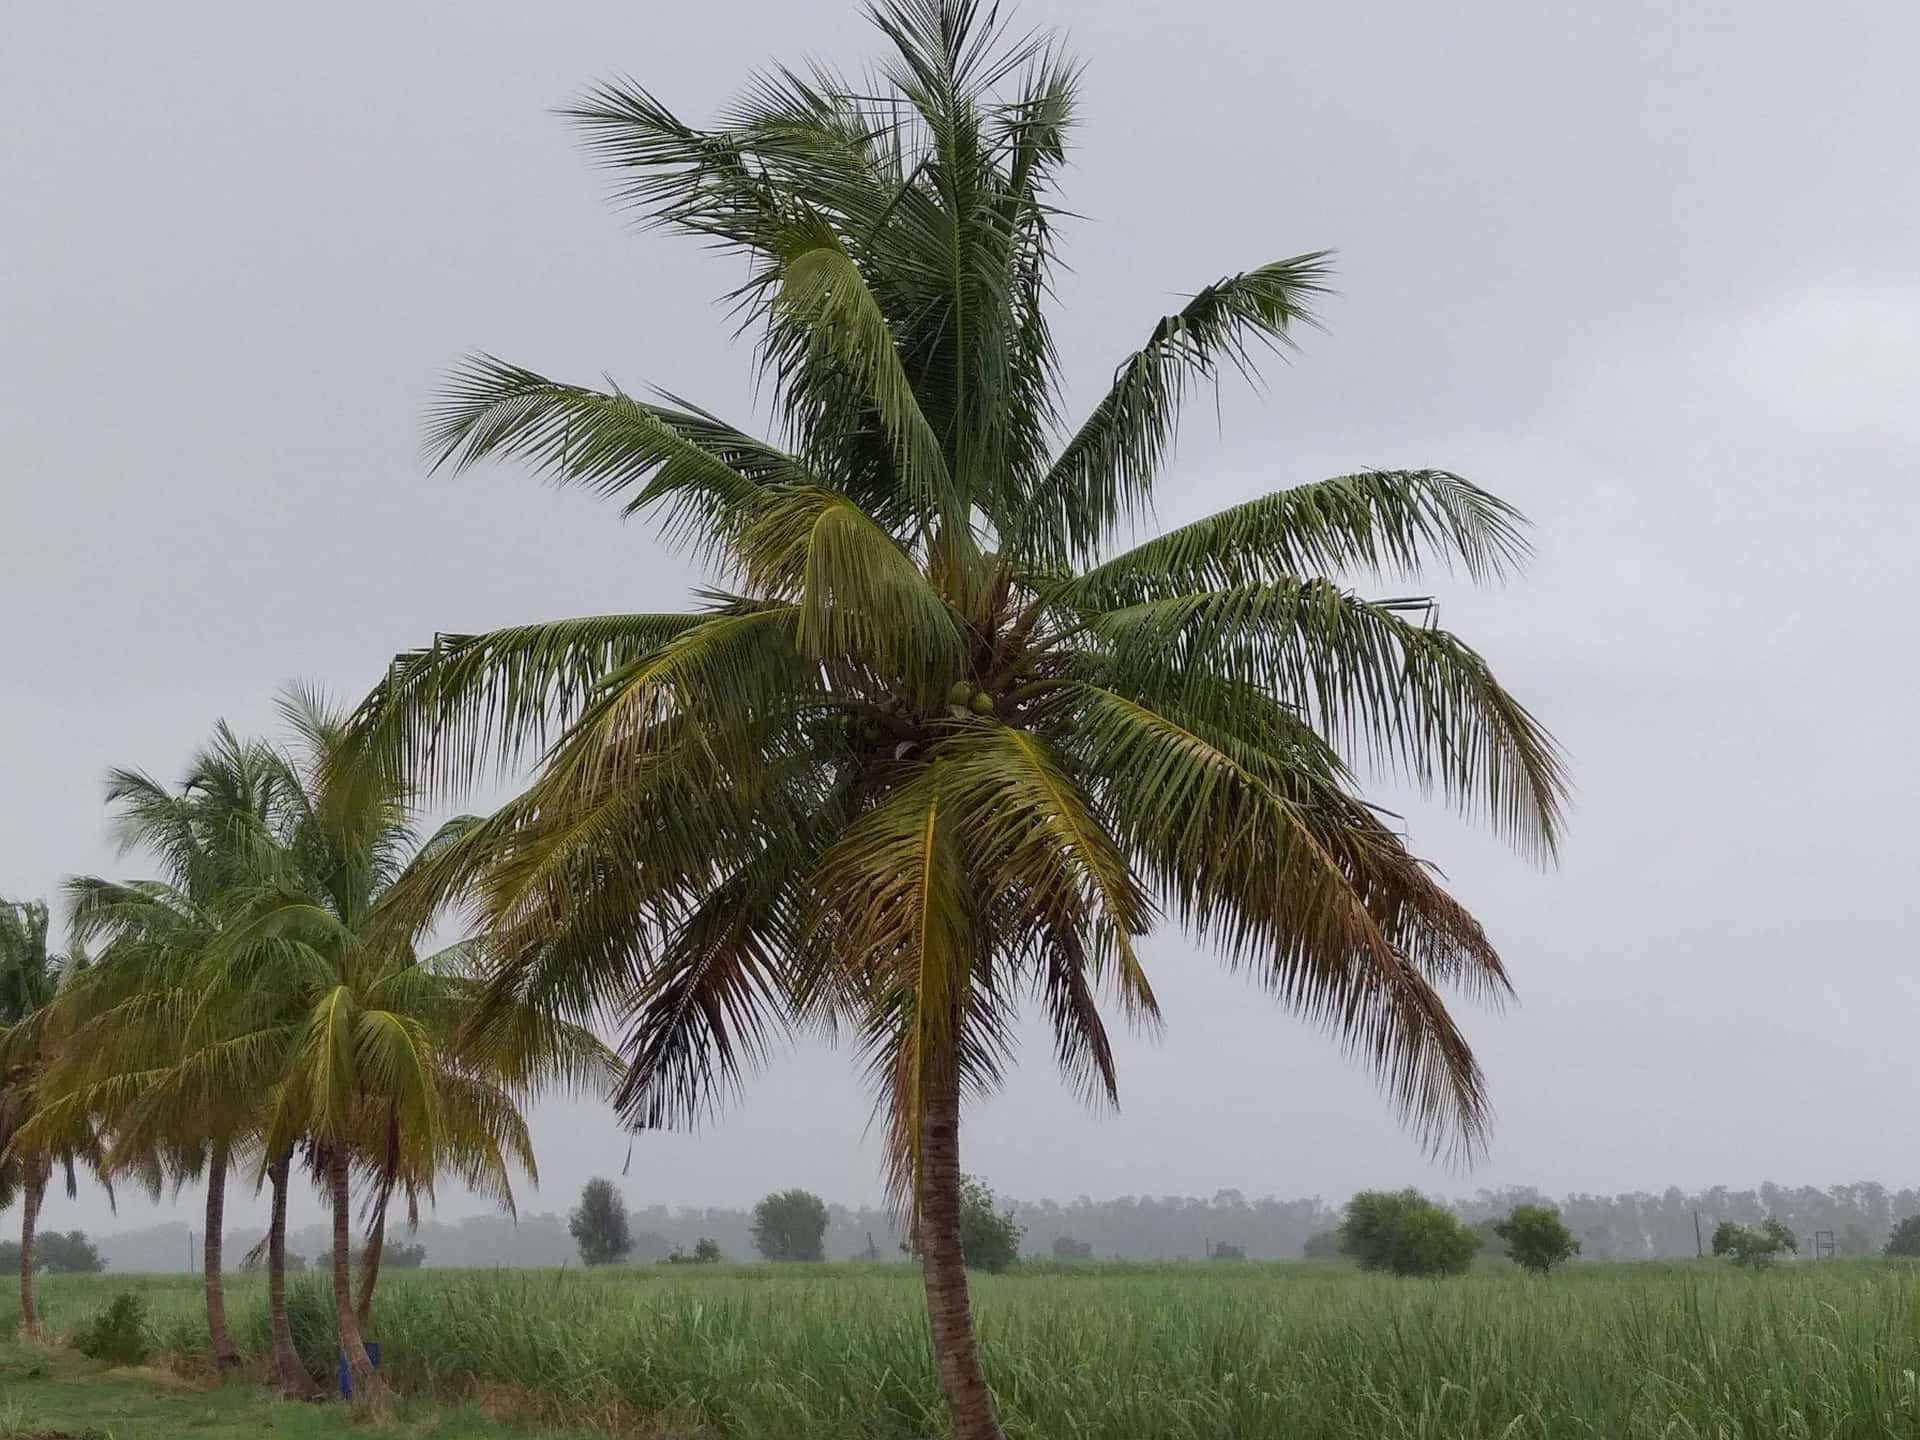 The Beauty of A Coconut Tree